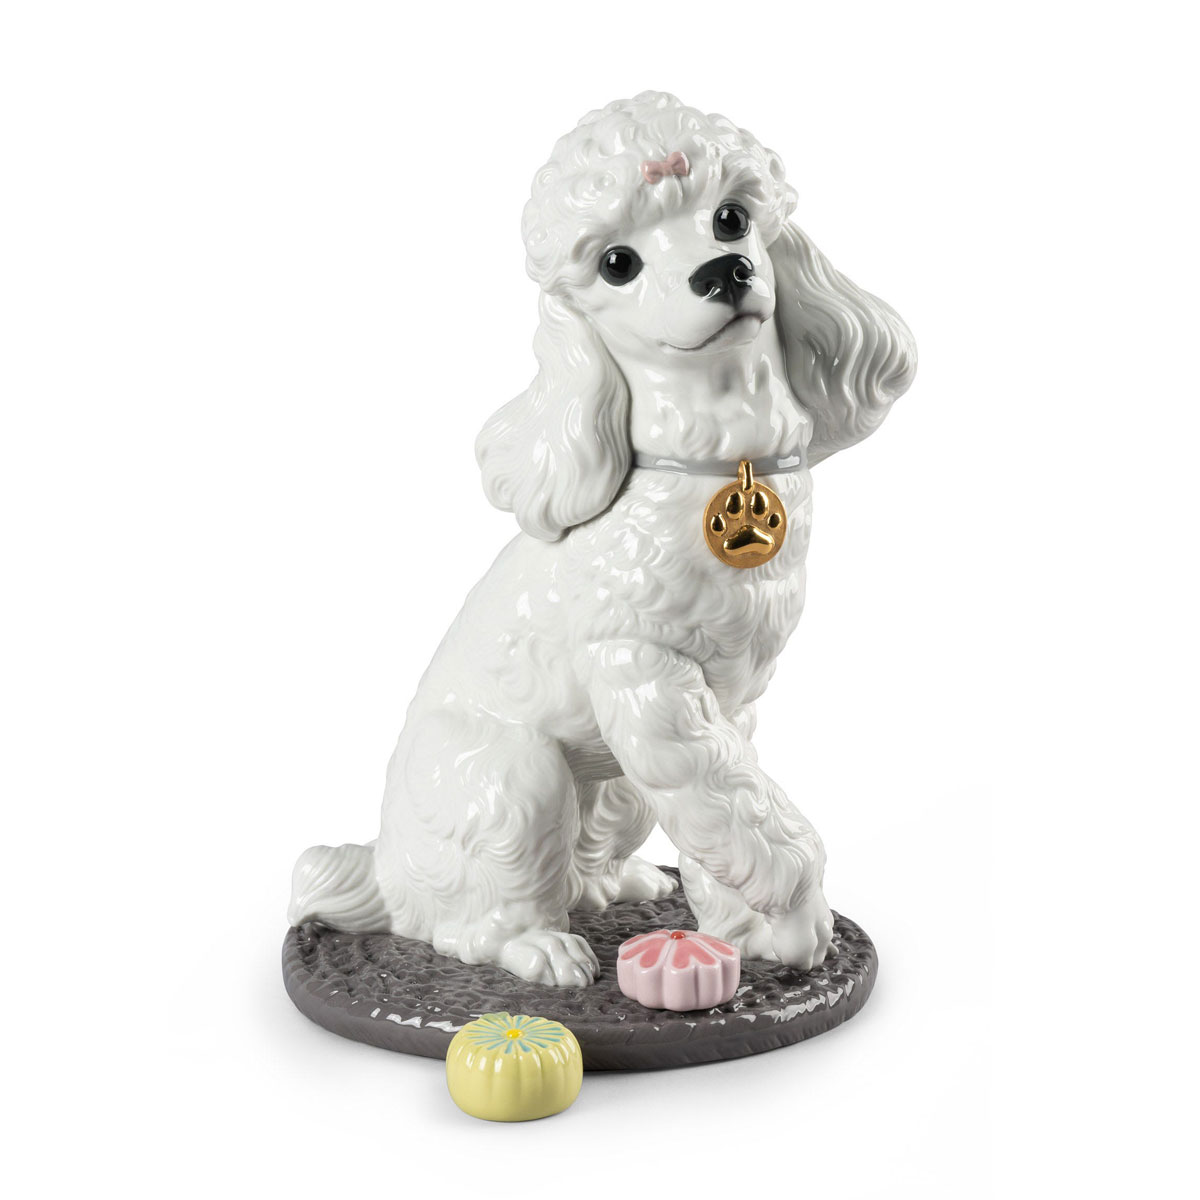 Lladro Classic Sculpture, Poodle With Mochis Dog Figurine